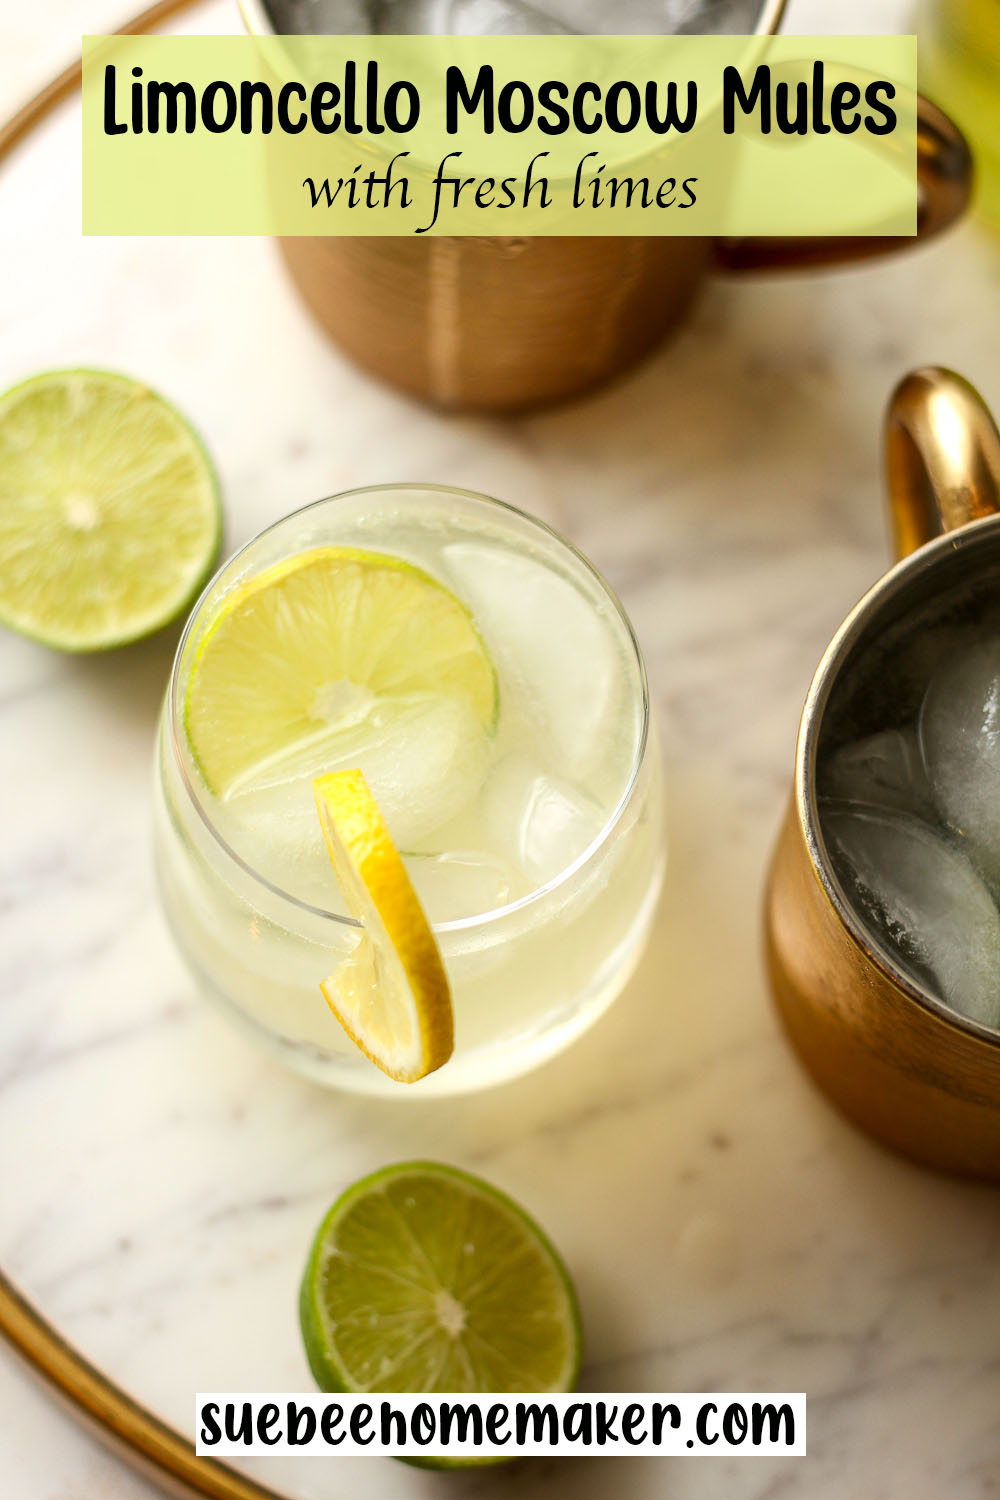 Overhead view of several limoncello Moscow mules with fresh limes.